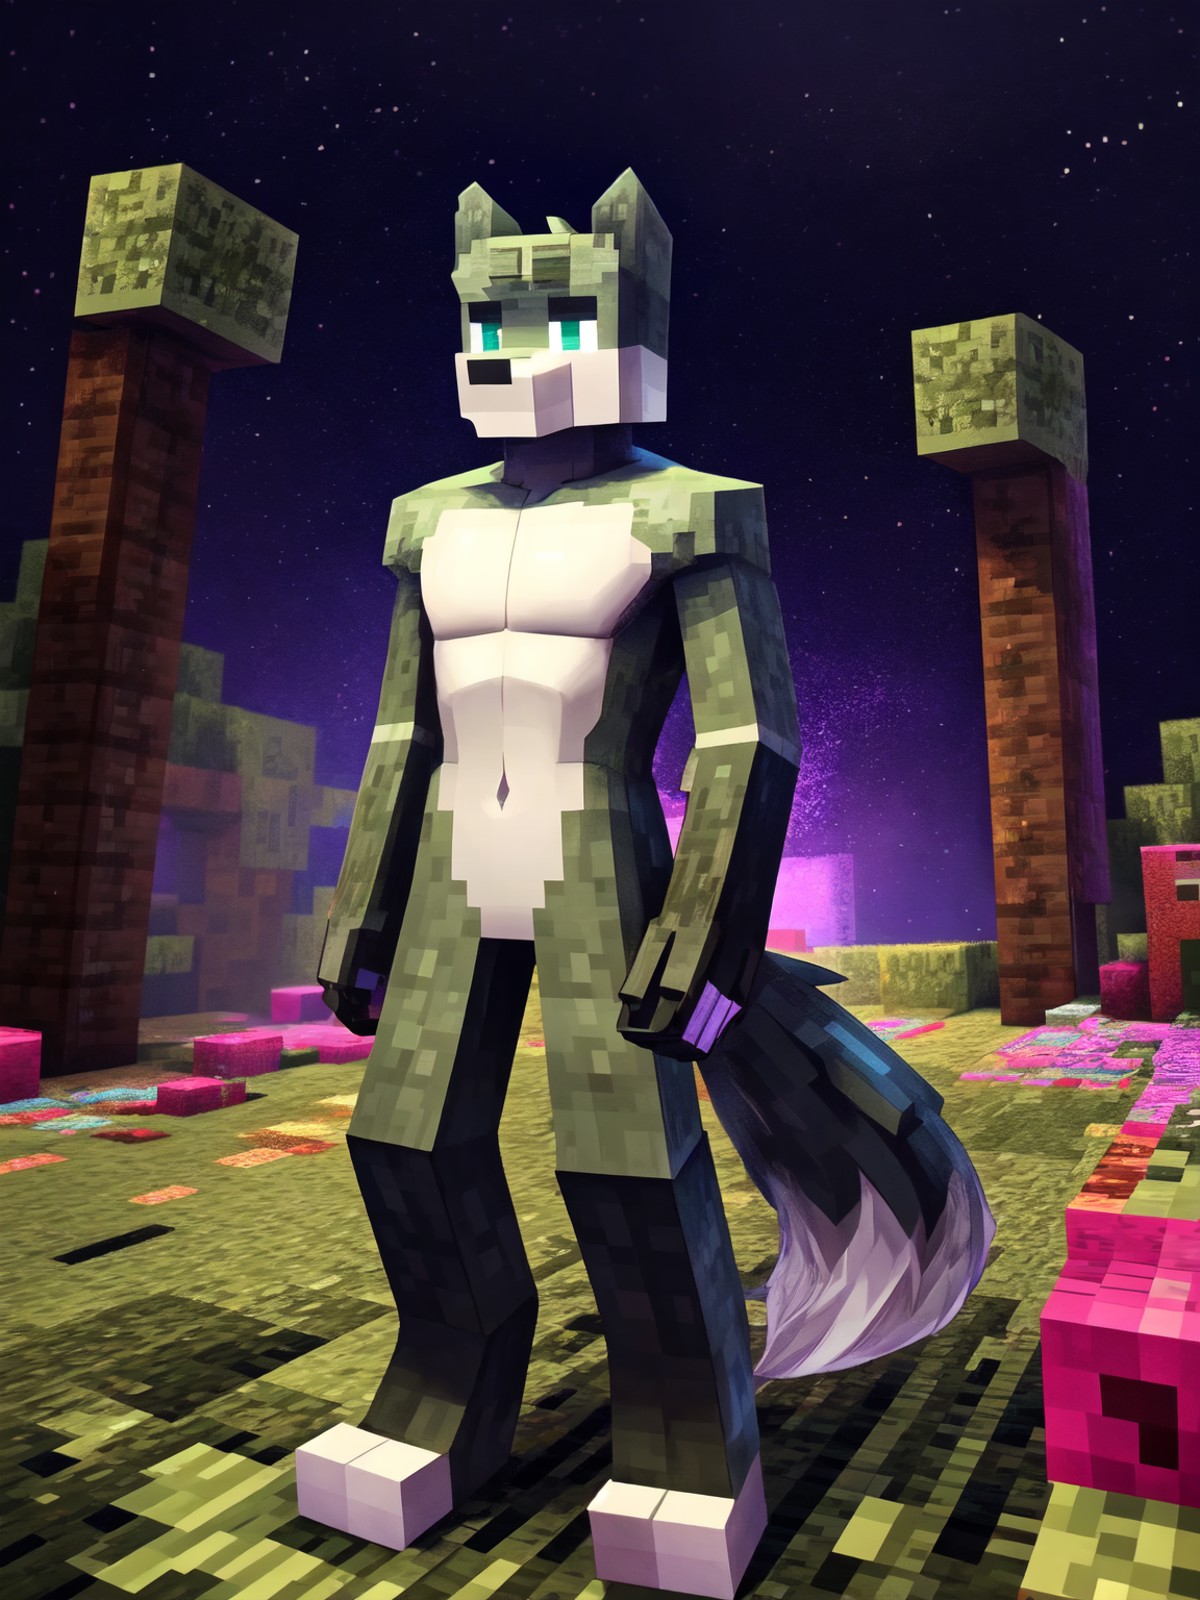 Minecraft style, minecraft, anthro, solo, male, wolf, blocky, vibrant colors, recognizable characters and objects, game as...